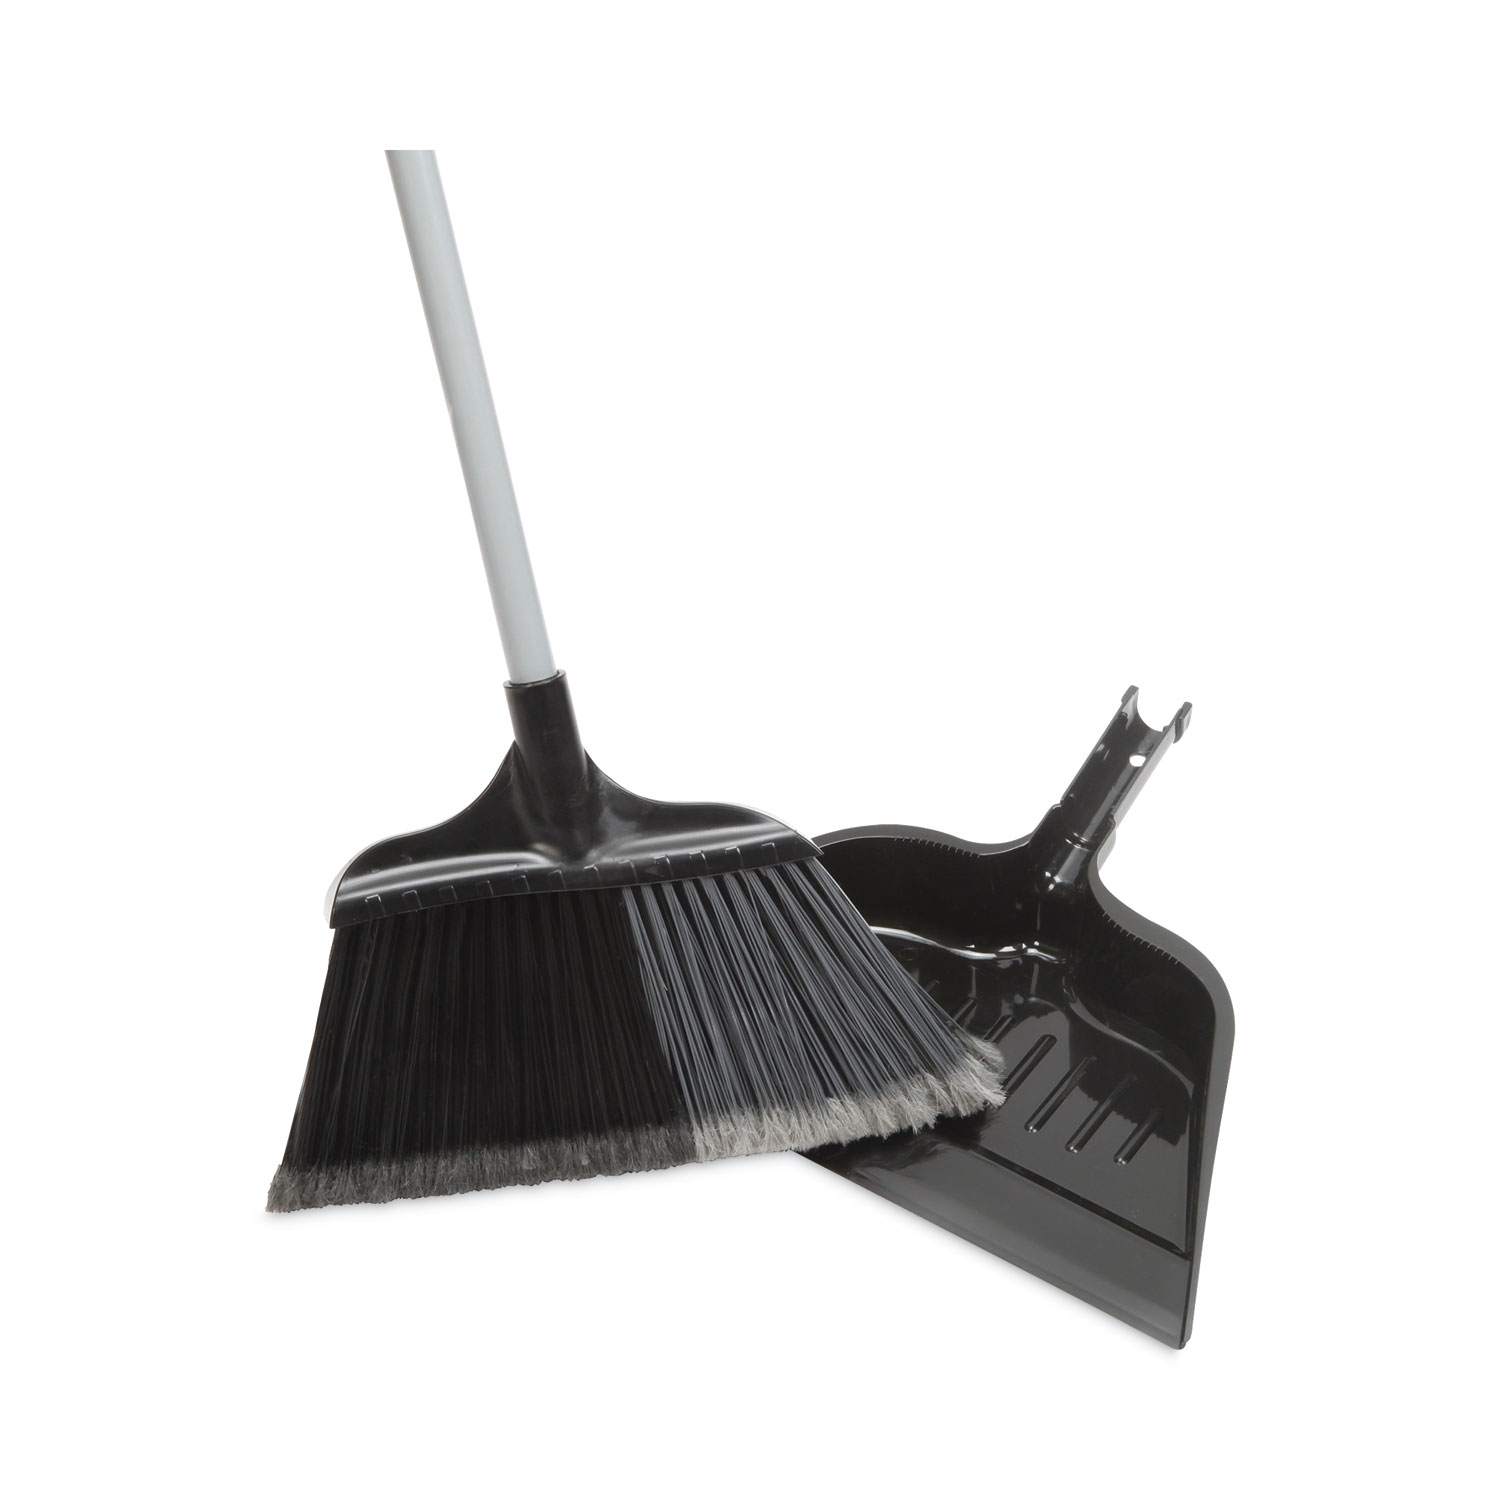 SKILCRAFT Microfiber Dust Mop with Handle by AbilityOne